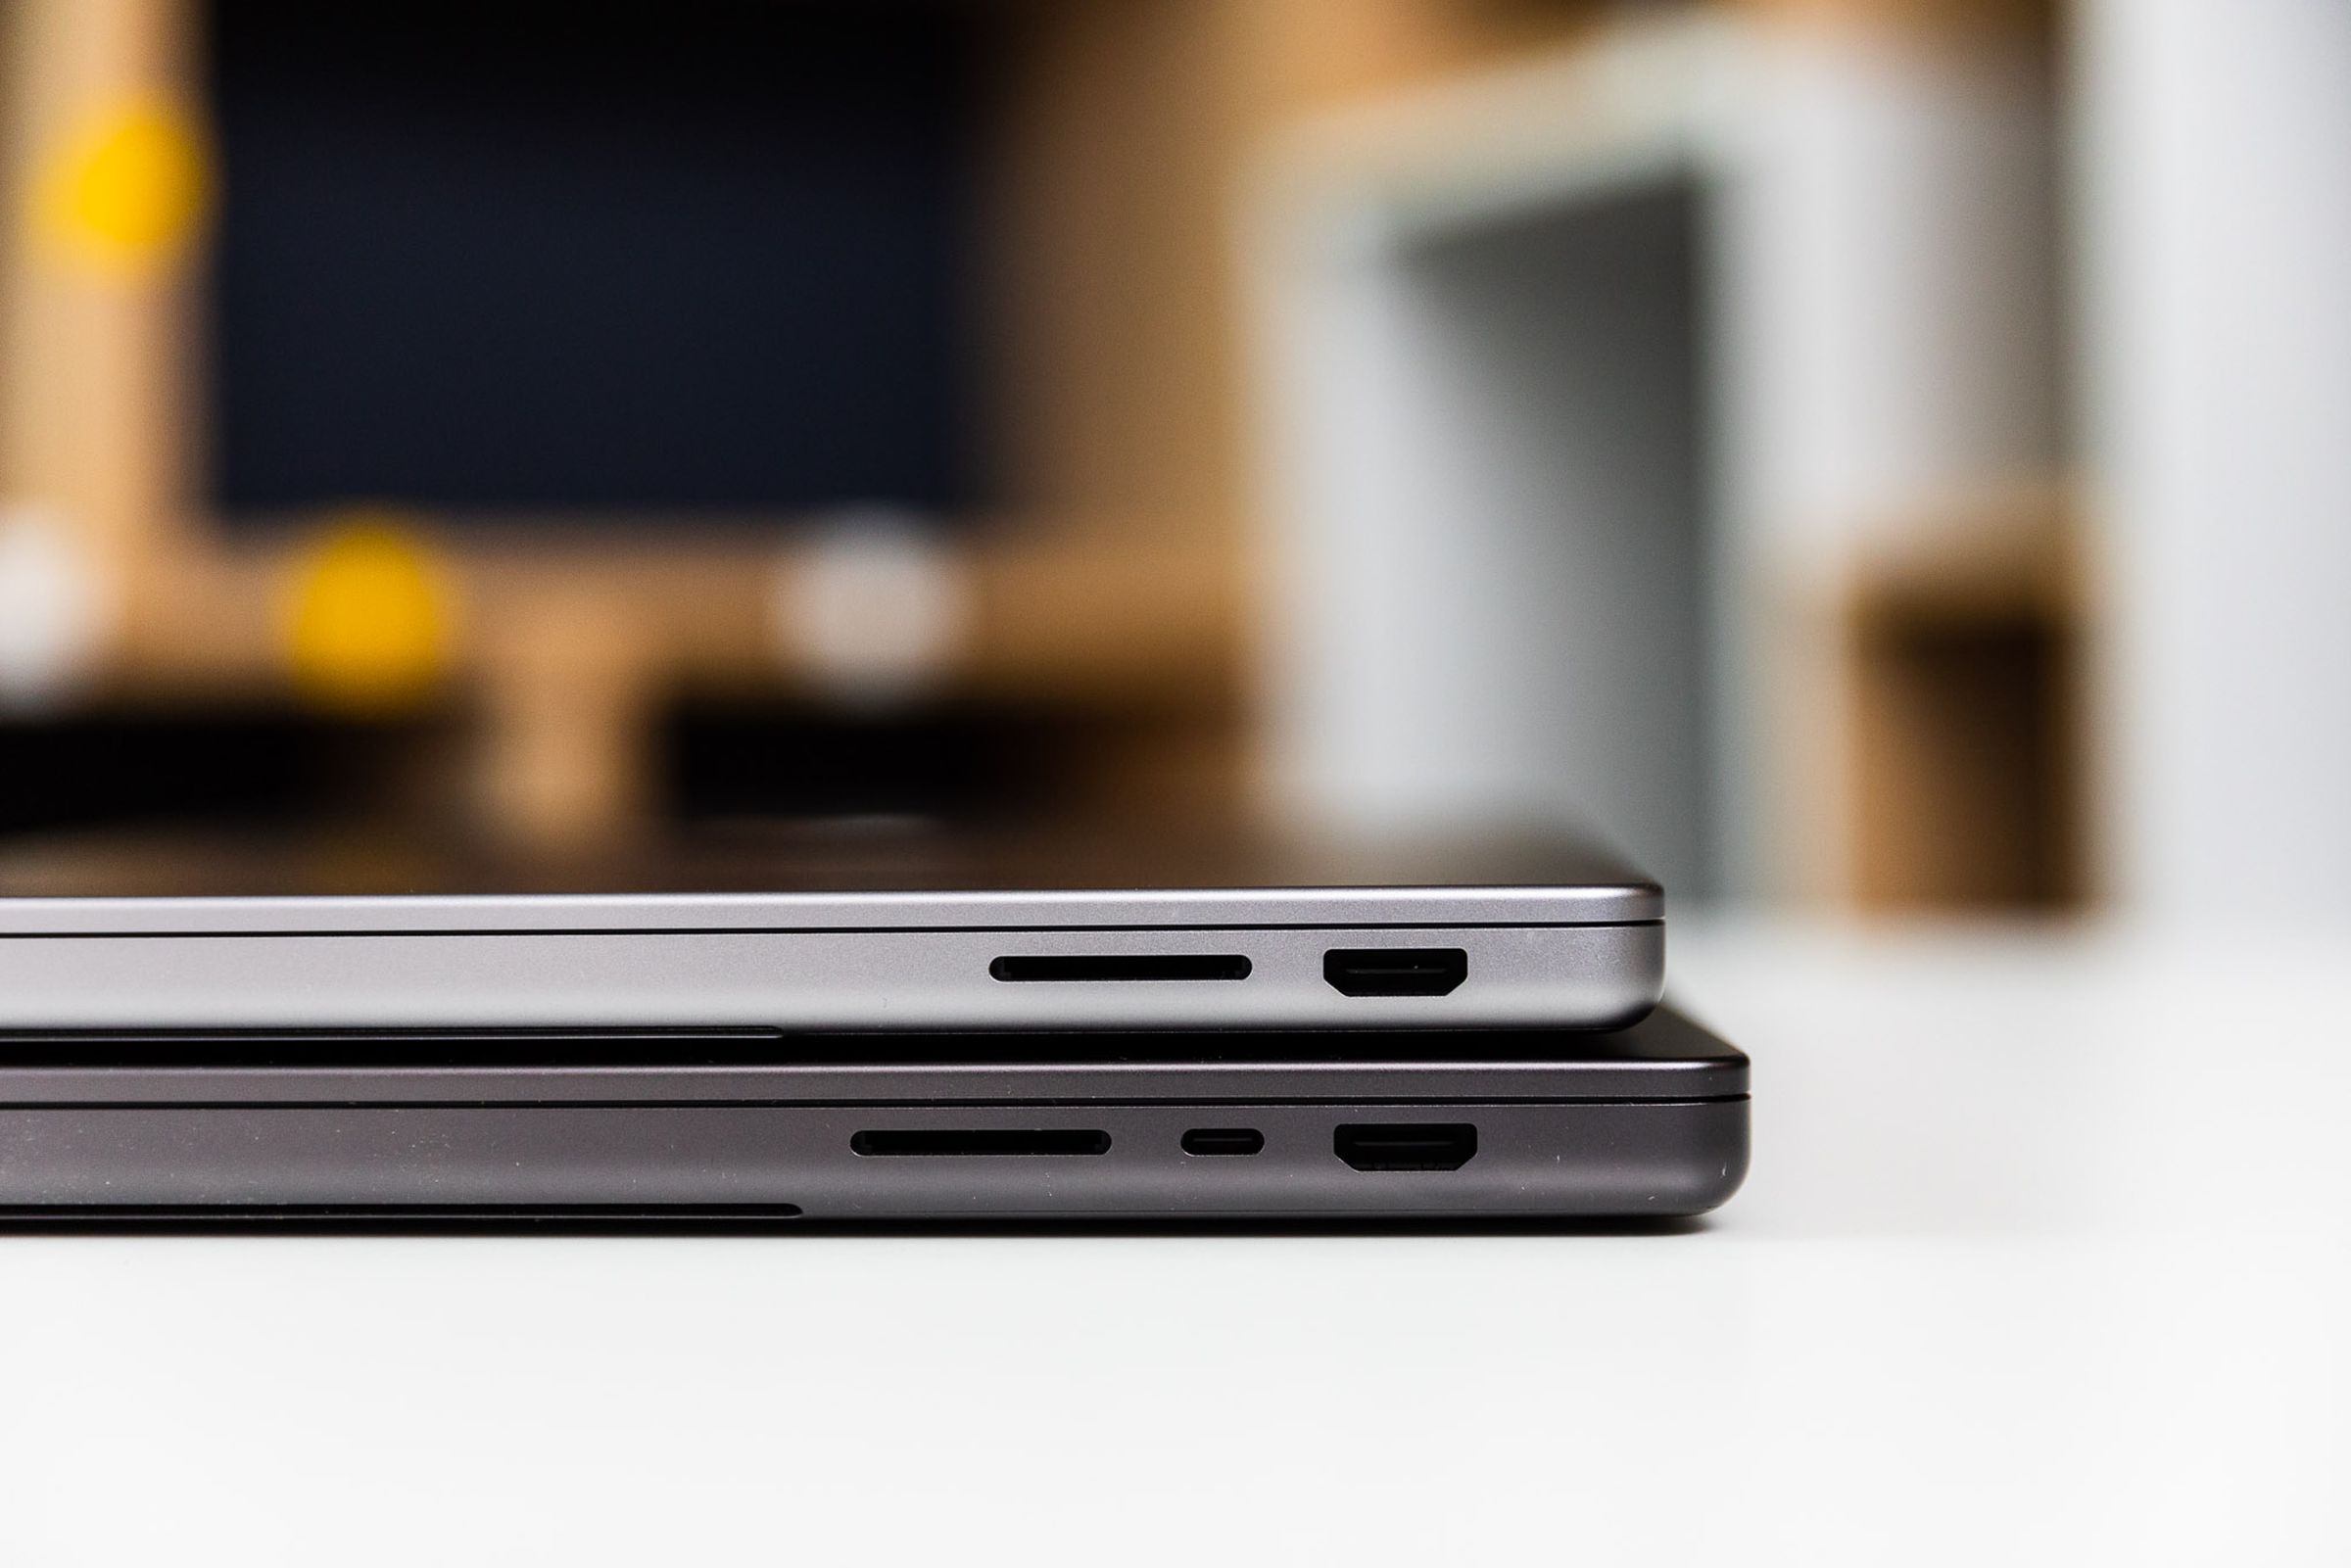 M3 MacBook 14 (top) and M3 Max Macbook 16 (bottom) showing the right side ports.